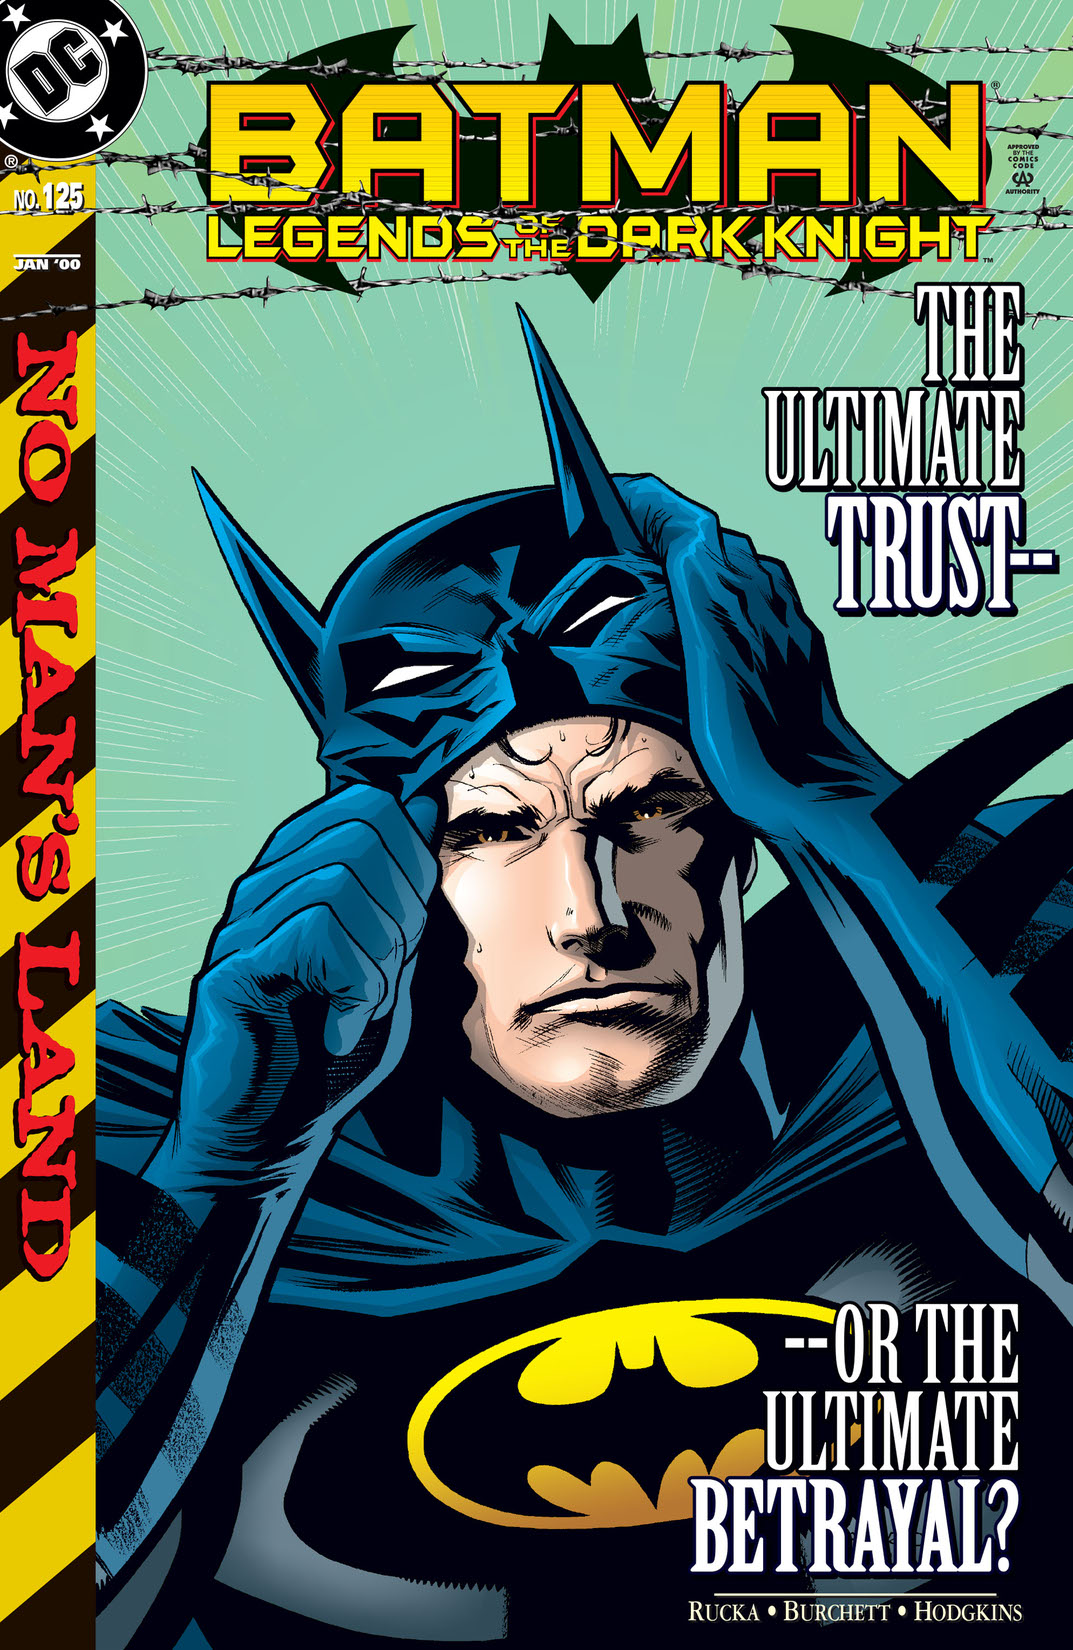 Batman: Legends of the Dark Knight #125 preview images